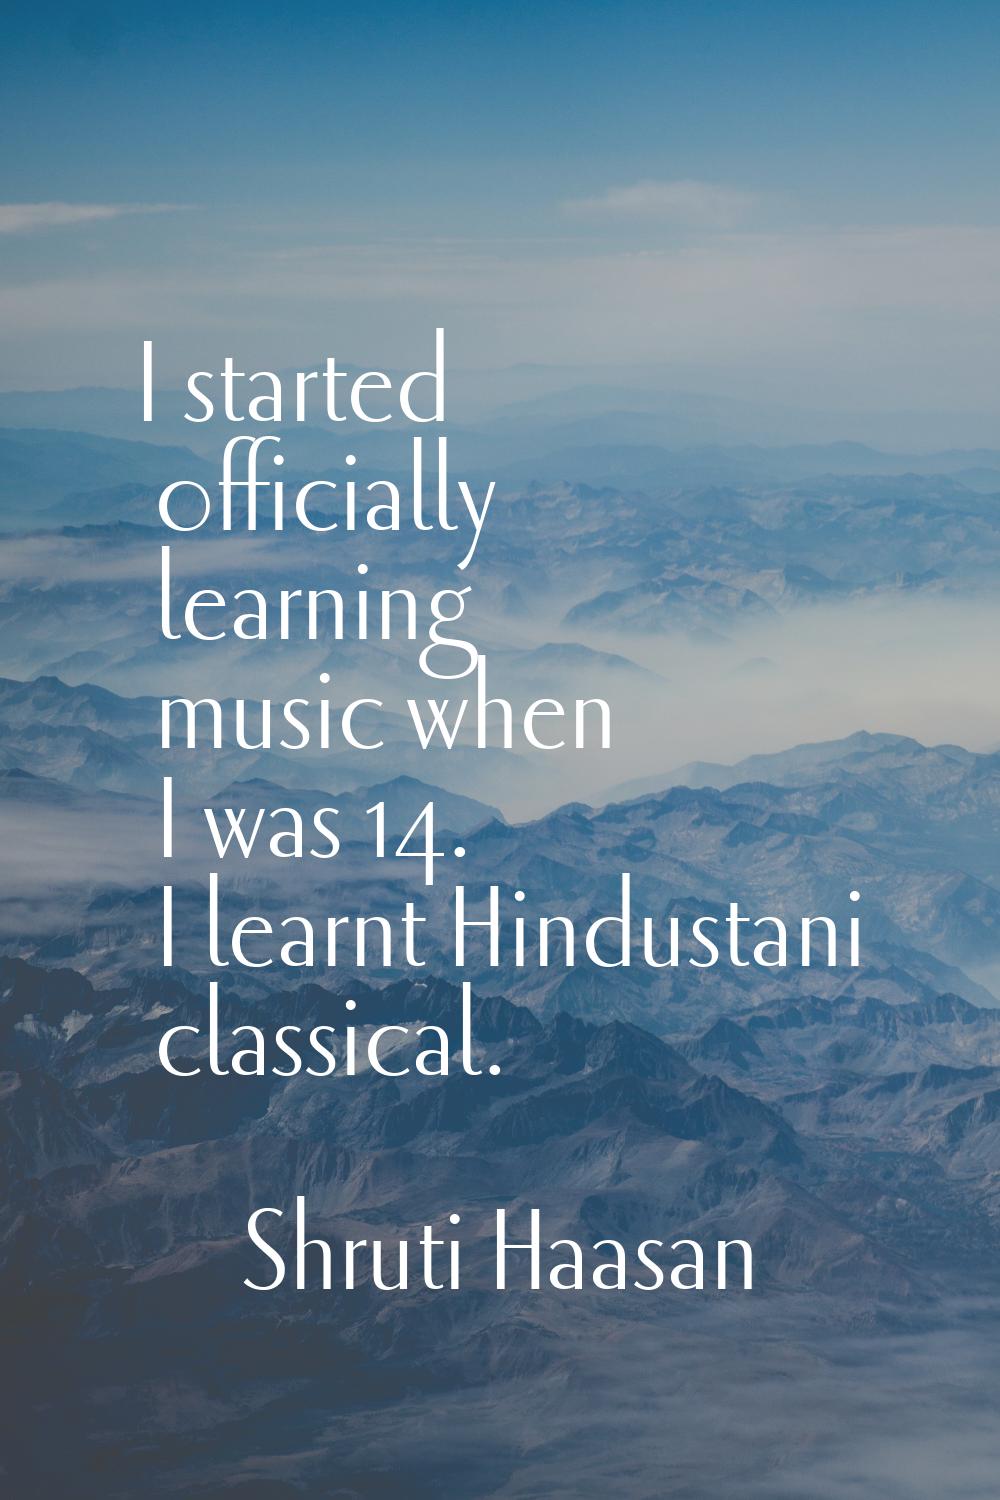 I started officially learning music when I was 14. I learnt Hindustani classical.